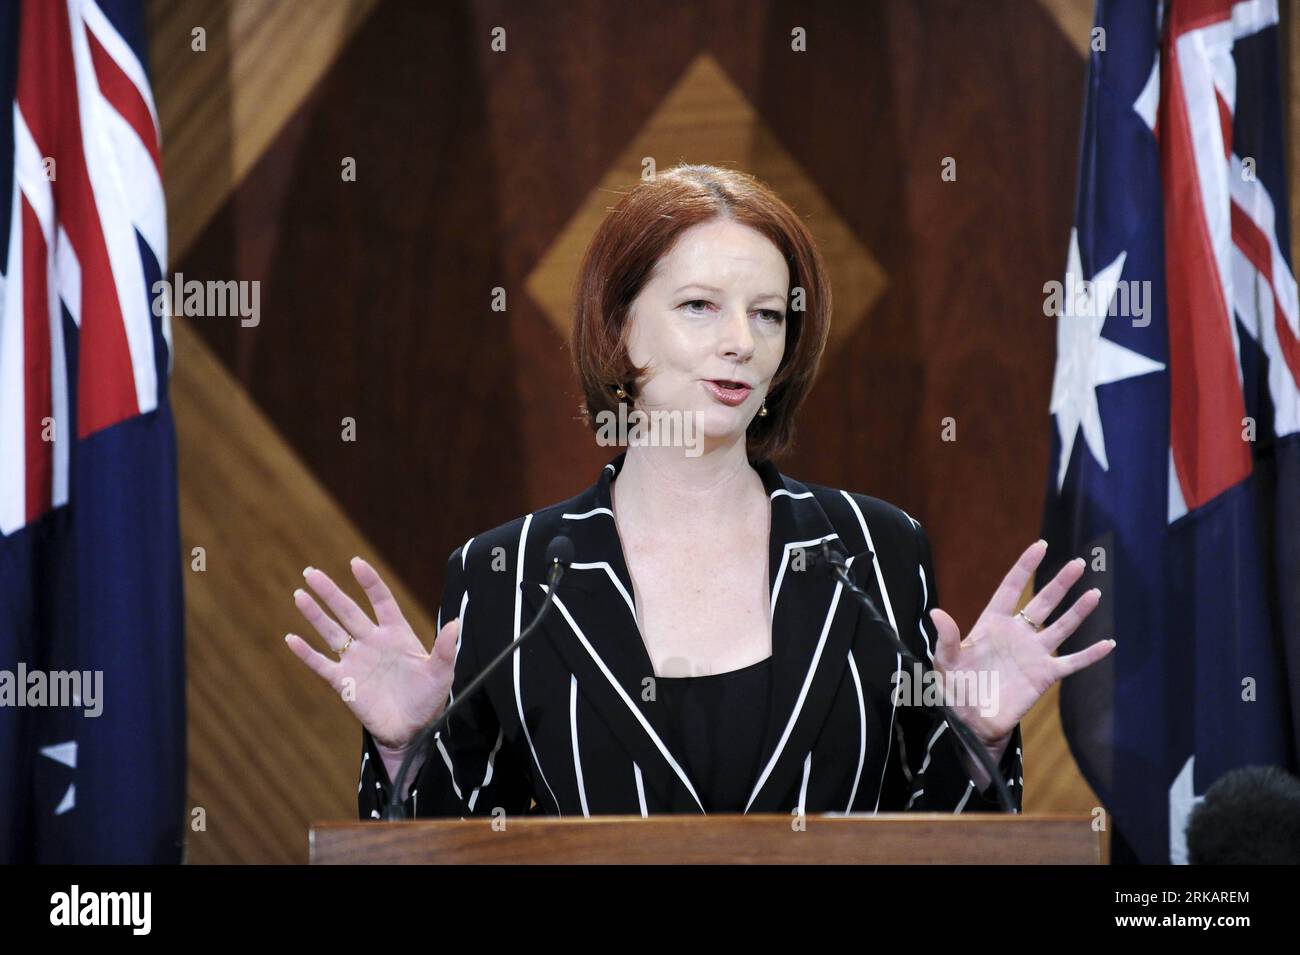 Bildnummer: 54418613  Datum: 11.09.2010  Copyright: imago/Xinhua (100911) -- MELBOURNE, Sep. 11, 2010 (Xinhua) -- Australian Prime Minister Julia Gillard announces her new cabinet for the Labor Government in next term in the Commonwealth Office in Melbourne, Australia, Sep 11, 2010. Gillard confirmed that former Prime Minister Kevin Rudd would be given the Foreign Affairs portfolio. (Xinhua/Bai Xue) (yc) AUSTRALIA-PRIME MINISTER-NEW CABINET PUBLICATIONxNOTxINxCHN People Politik kbdig xmk 2010 quer premiumd xint     Bildnummer 54418613 Date 11 09 2010 Copyright Imago XINHUA  Melbourne Sep 11 20 Stock Photo